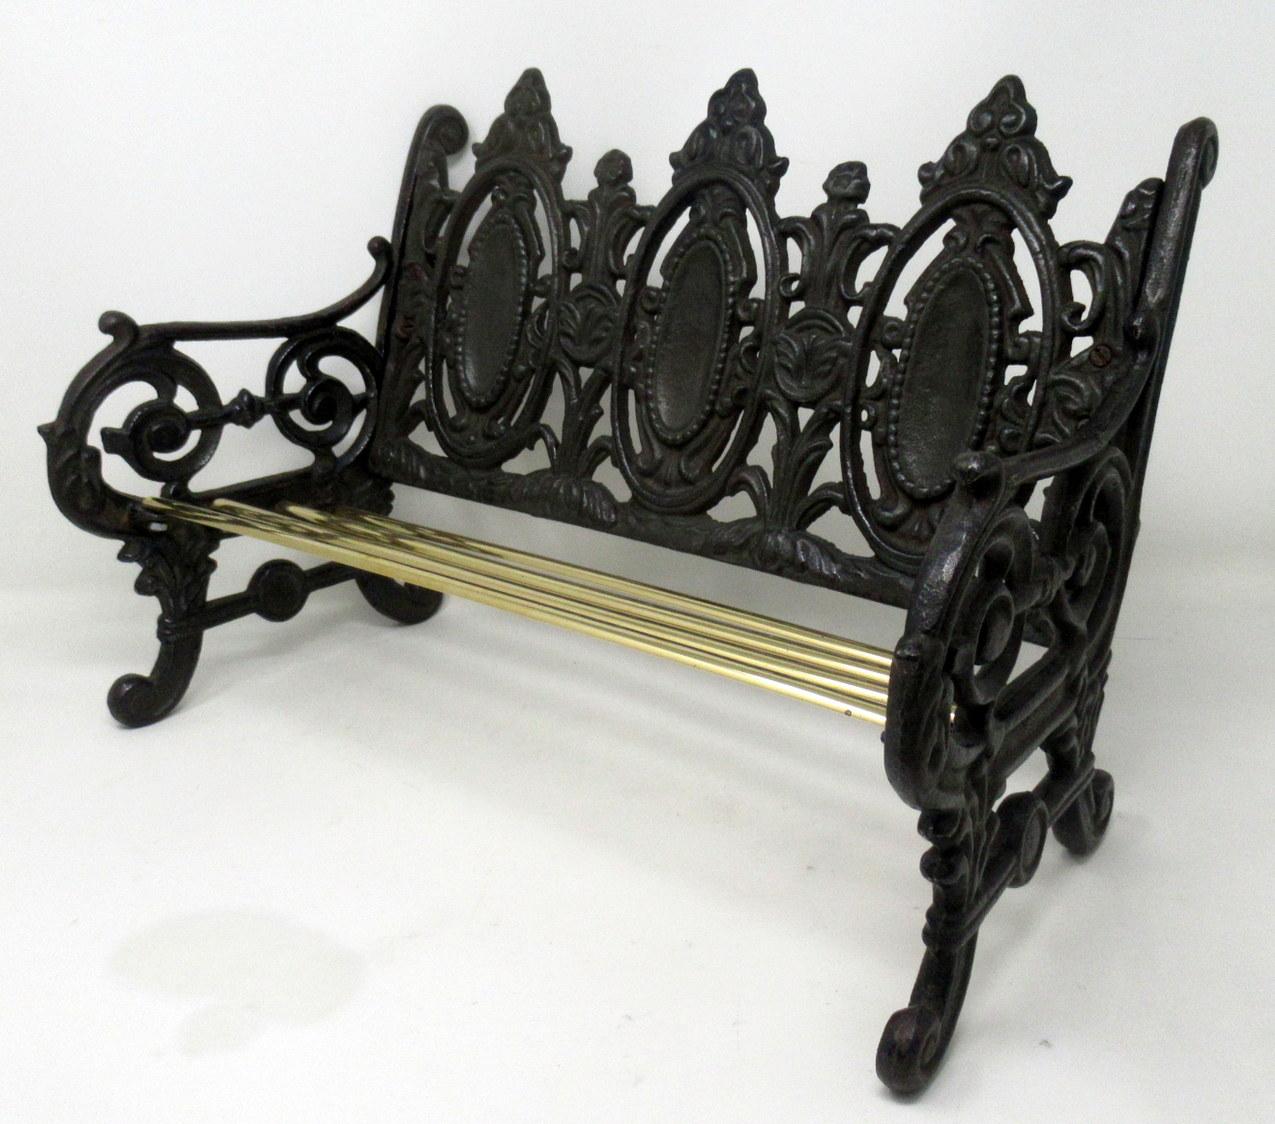 A very unusual child’s miniature dolls house or teddy bear bench or possibly a travelling salesman’s sample, probably produced in England by the Coalbrookdale Foundry during the first half of the 20th century.

The pierced Gothic style main frame